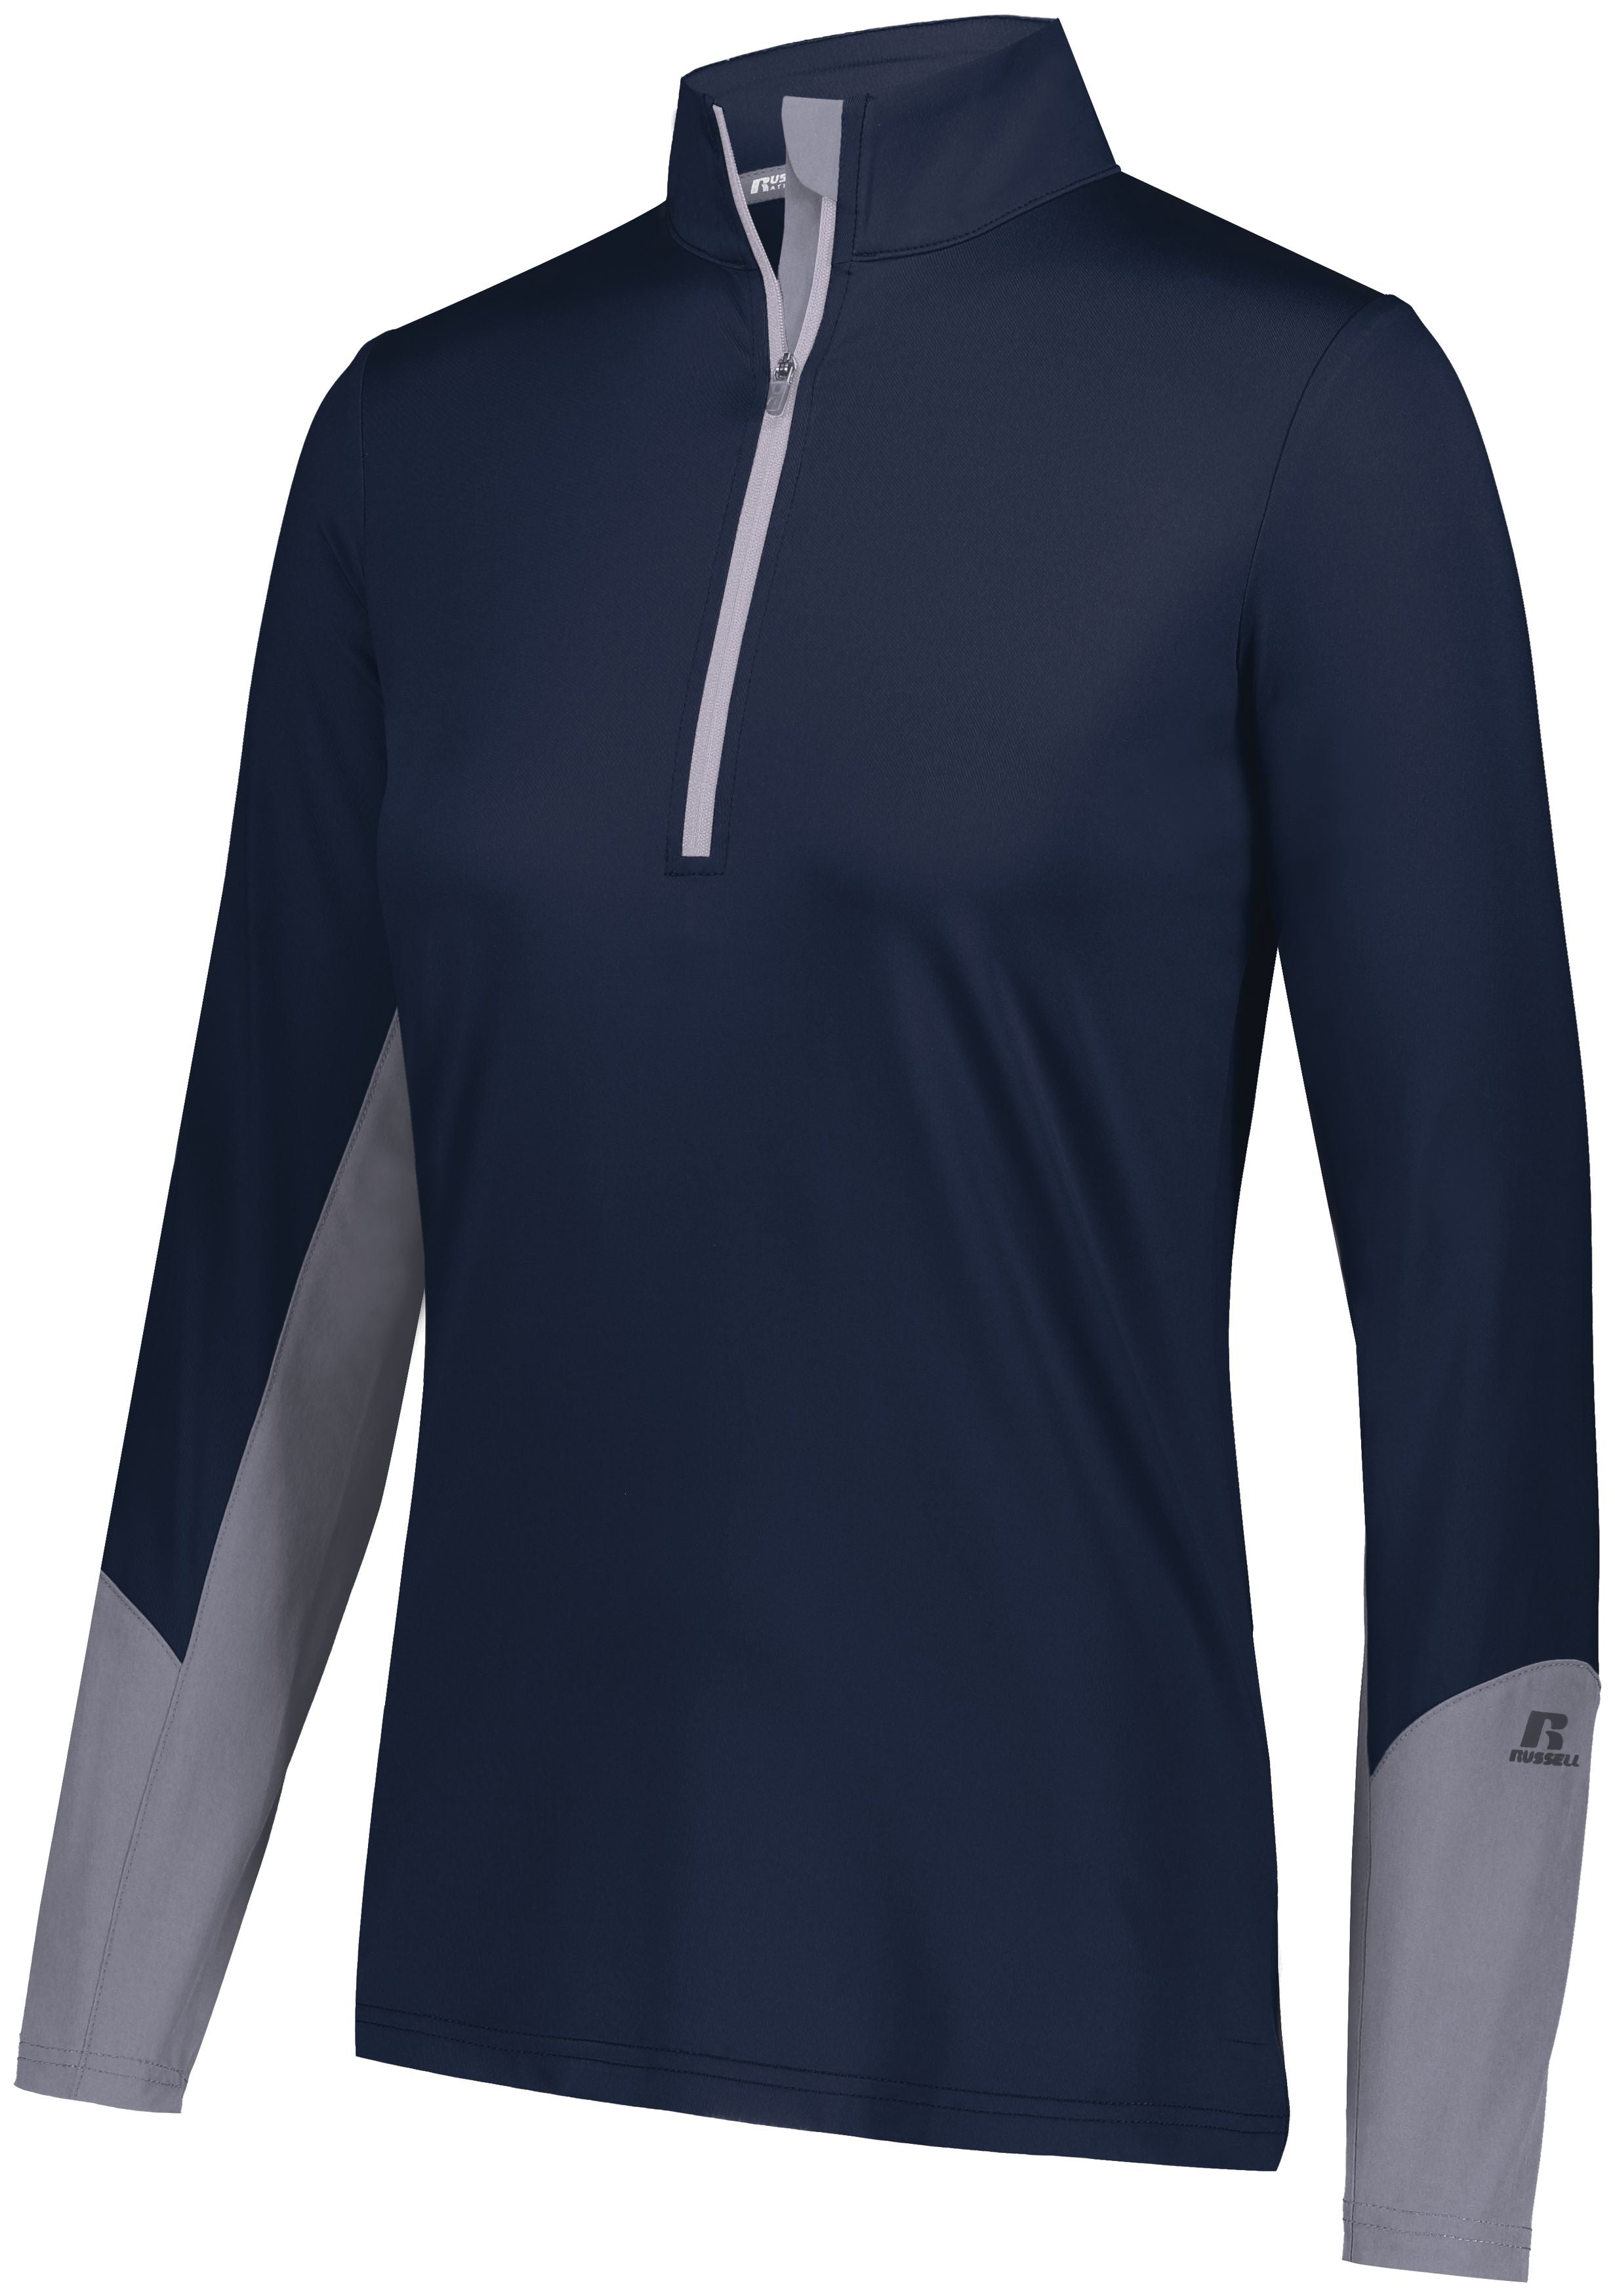 Russell Athletic Ladies Hybrid Pullover in Navy/Steel  -Part of the Ladies, Russell-Athletic-Products, Shirts product lines at KanaleyCreations.com